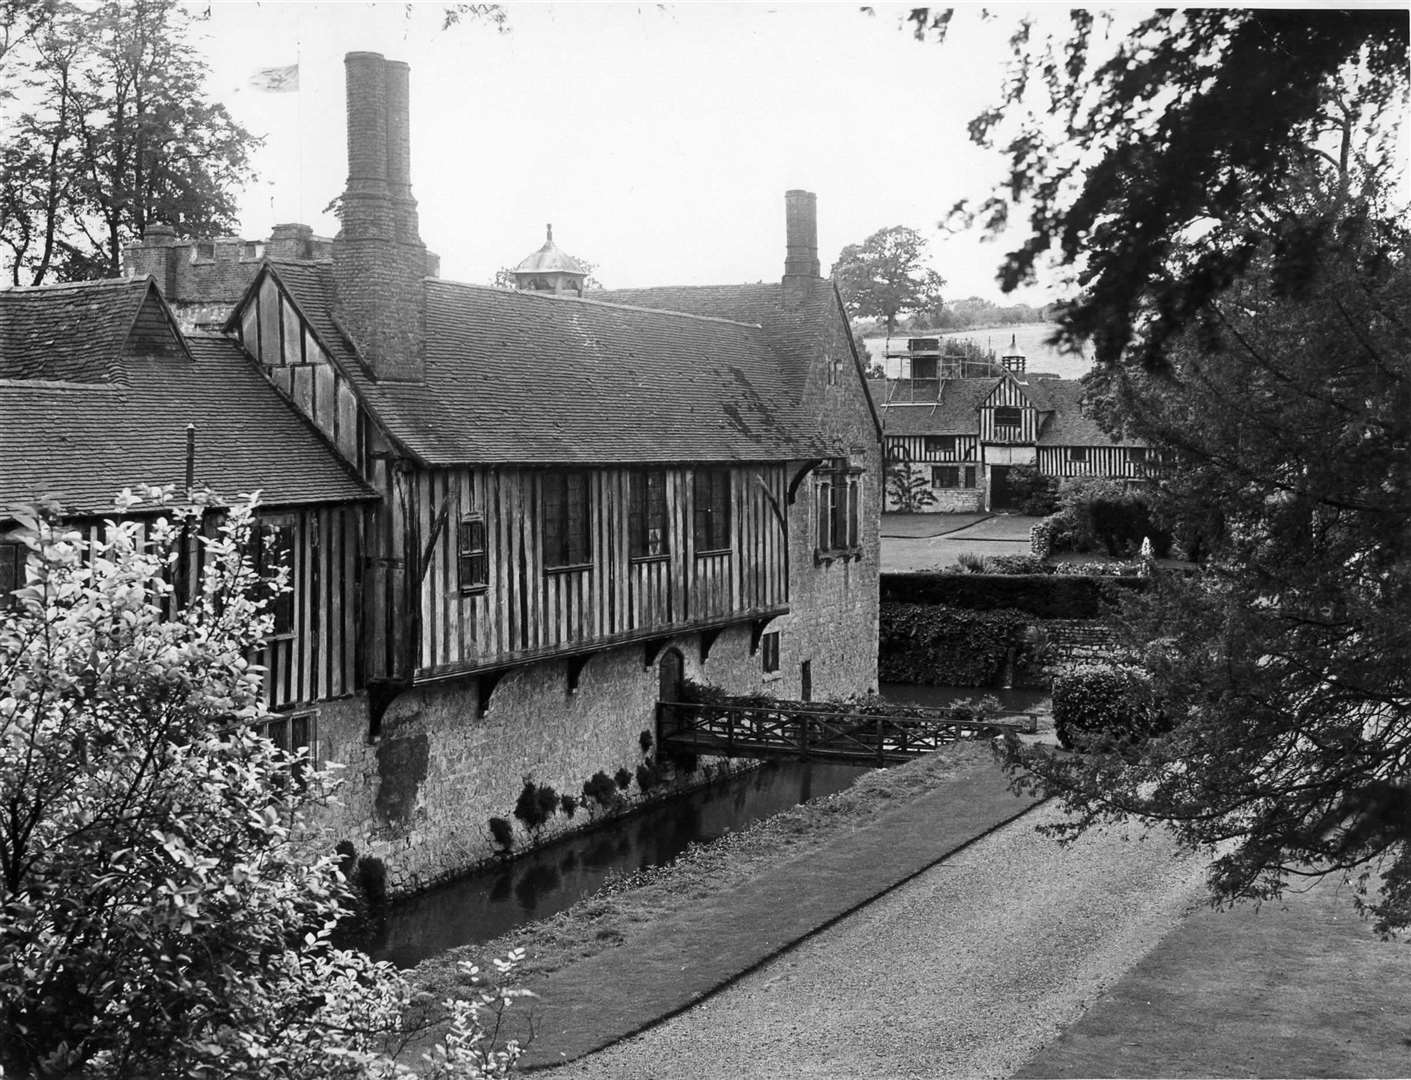 Ightham Mote, pictured in 1967